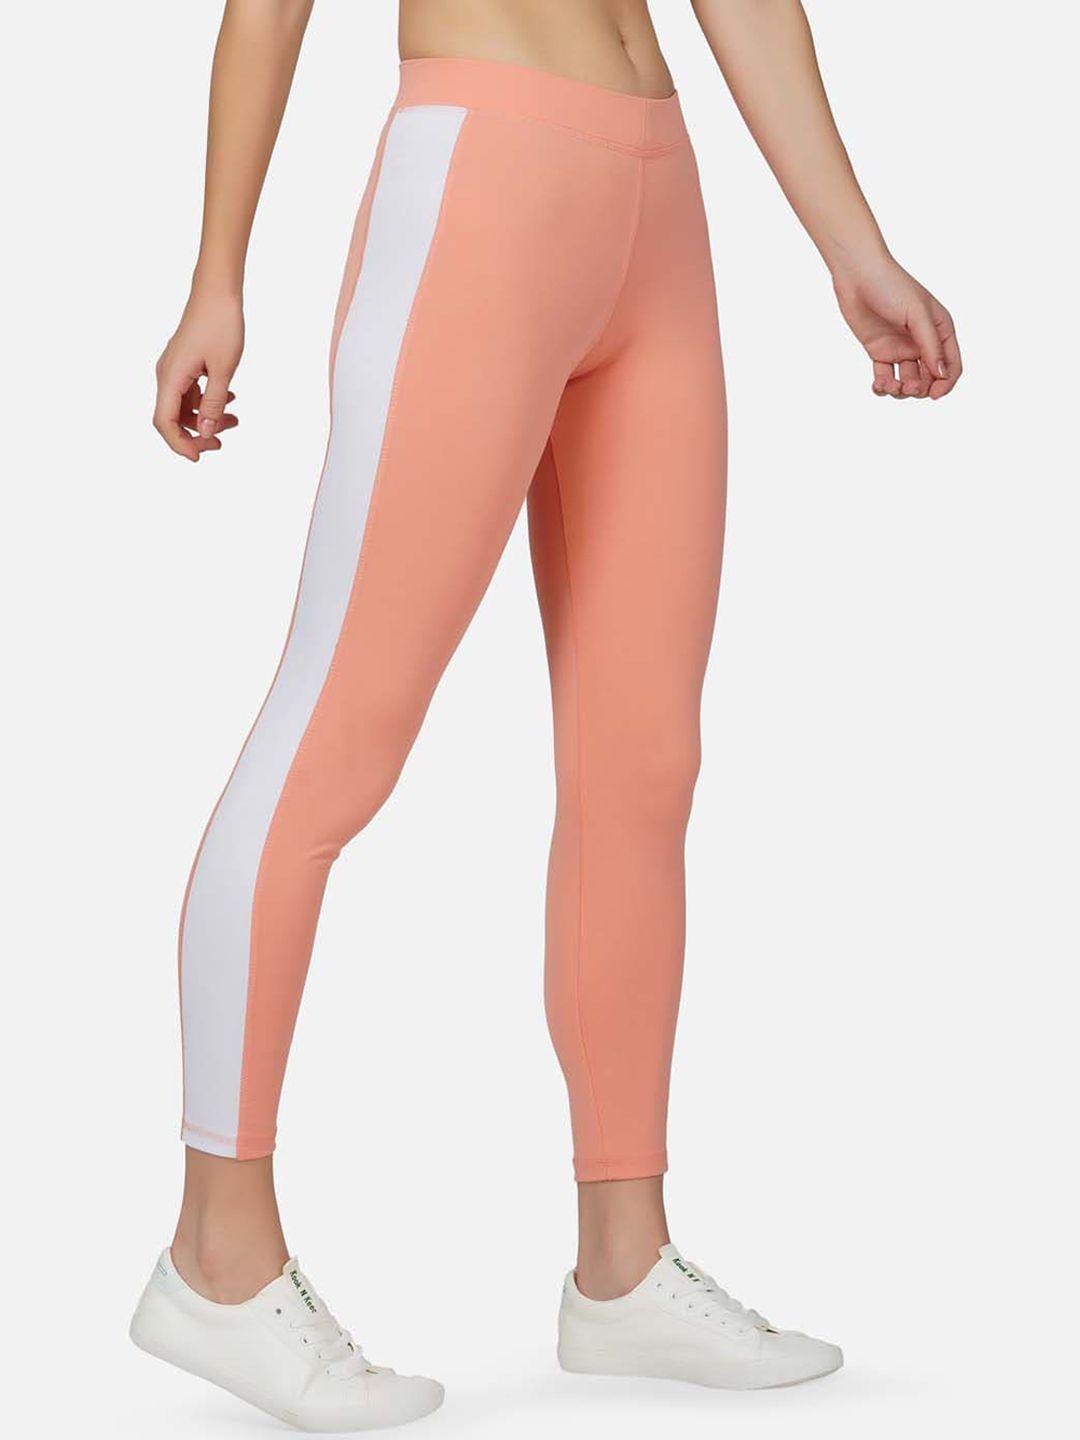 imperative-colourblocked-high-rise-slim-fit-antimicrobial-ankle-length-sports-tights